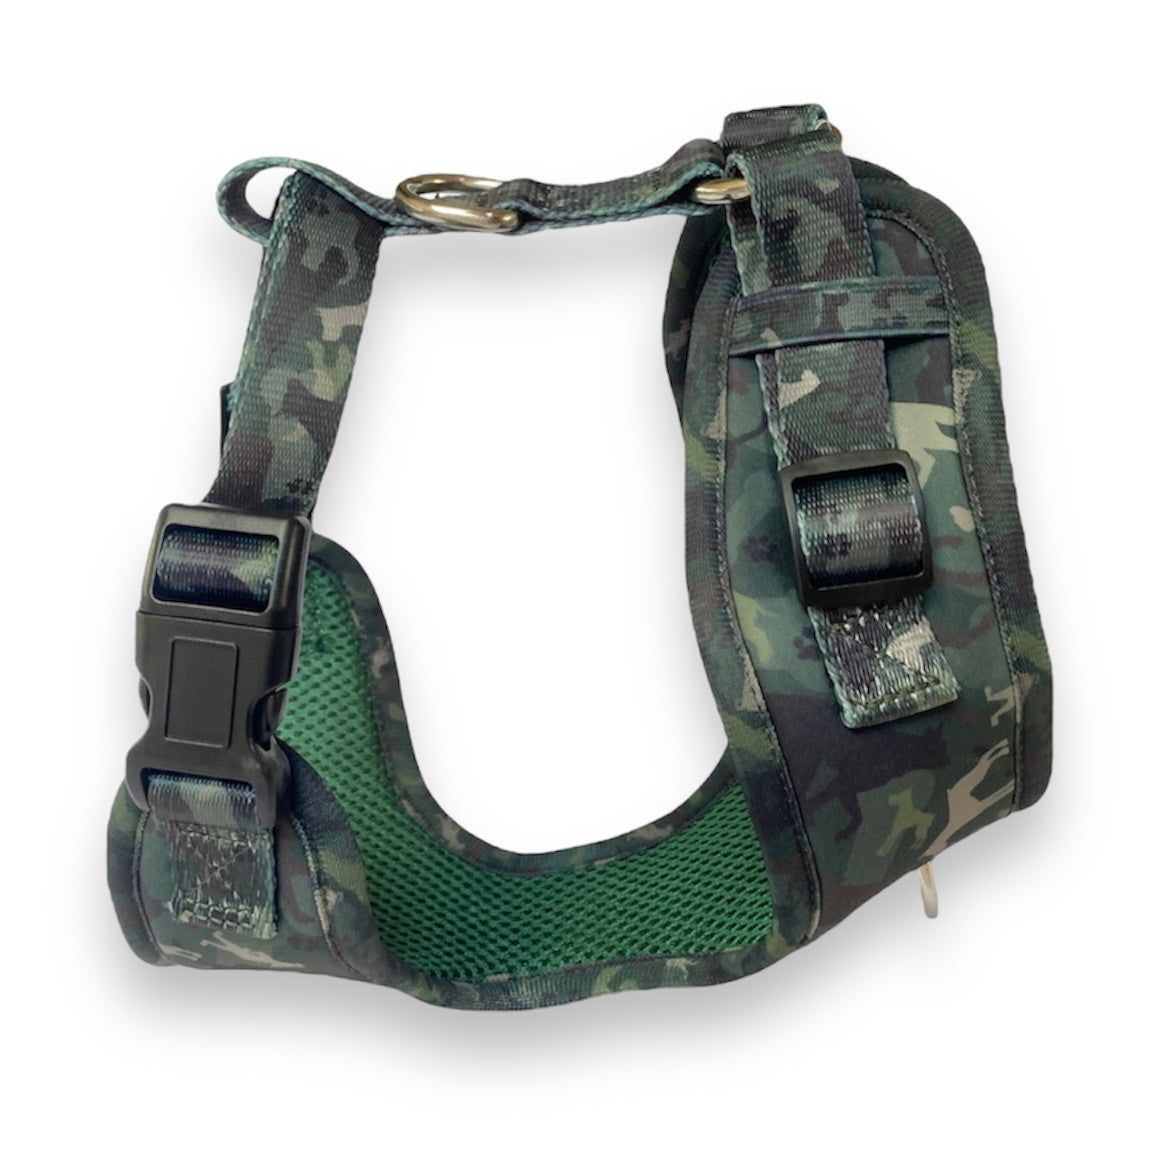 a 3D photo of a green camouflage small dog harness by fearless pet on a white background